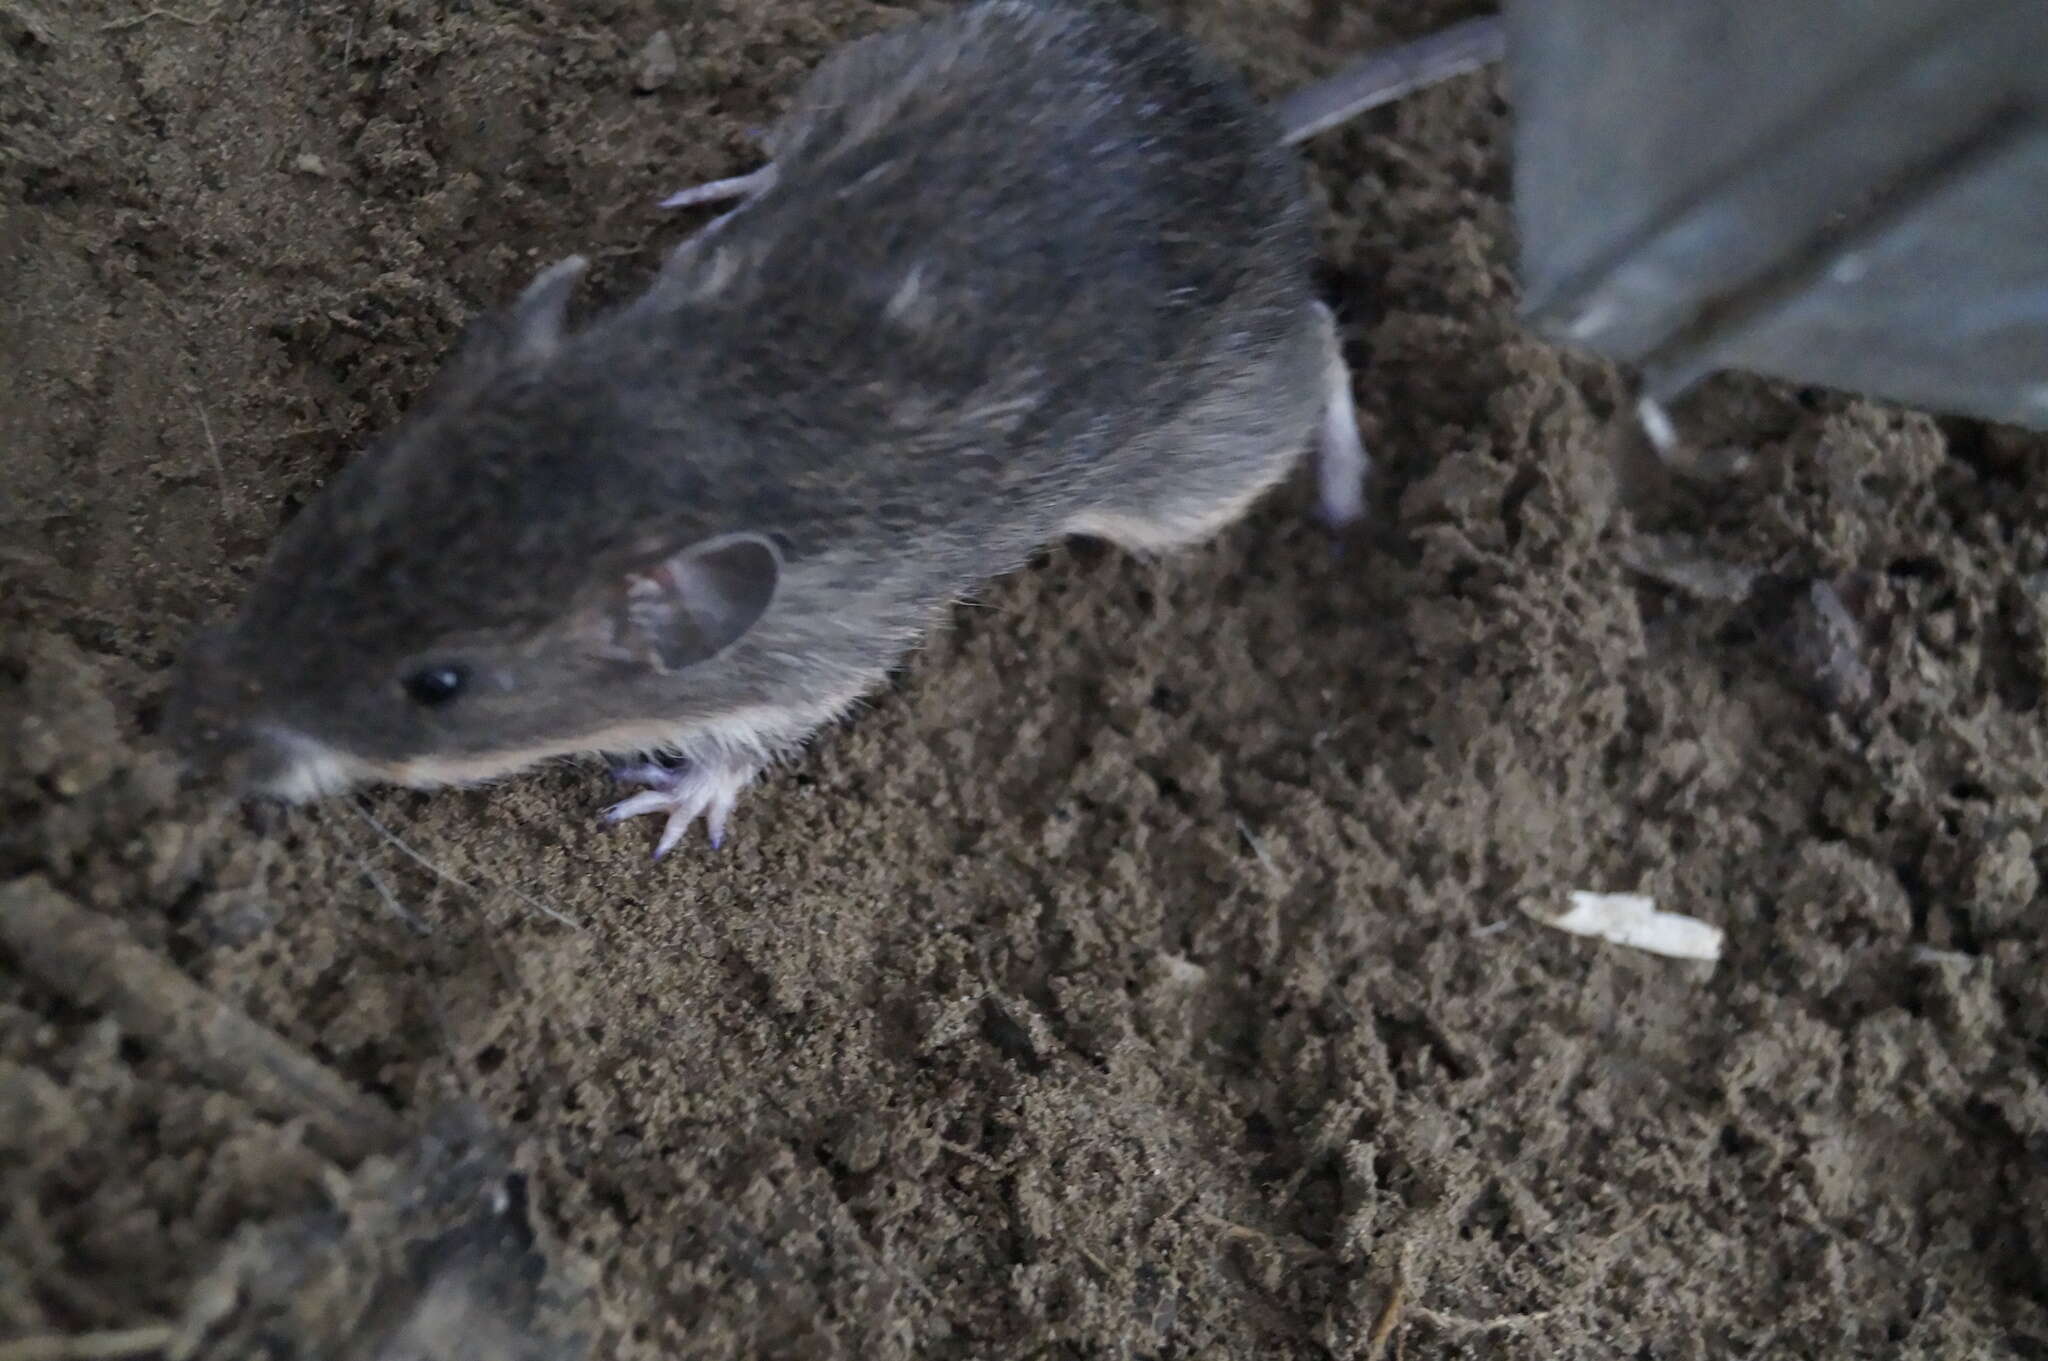 Image of Mexican spiny pocket mouse